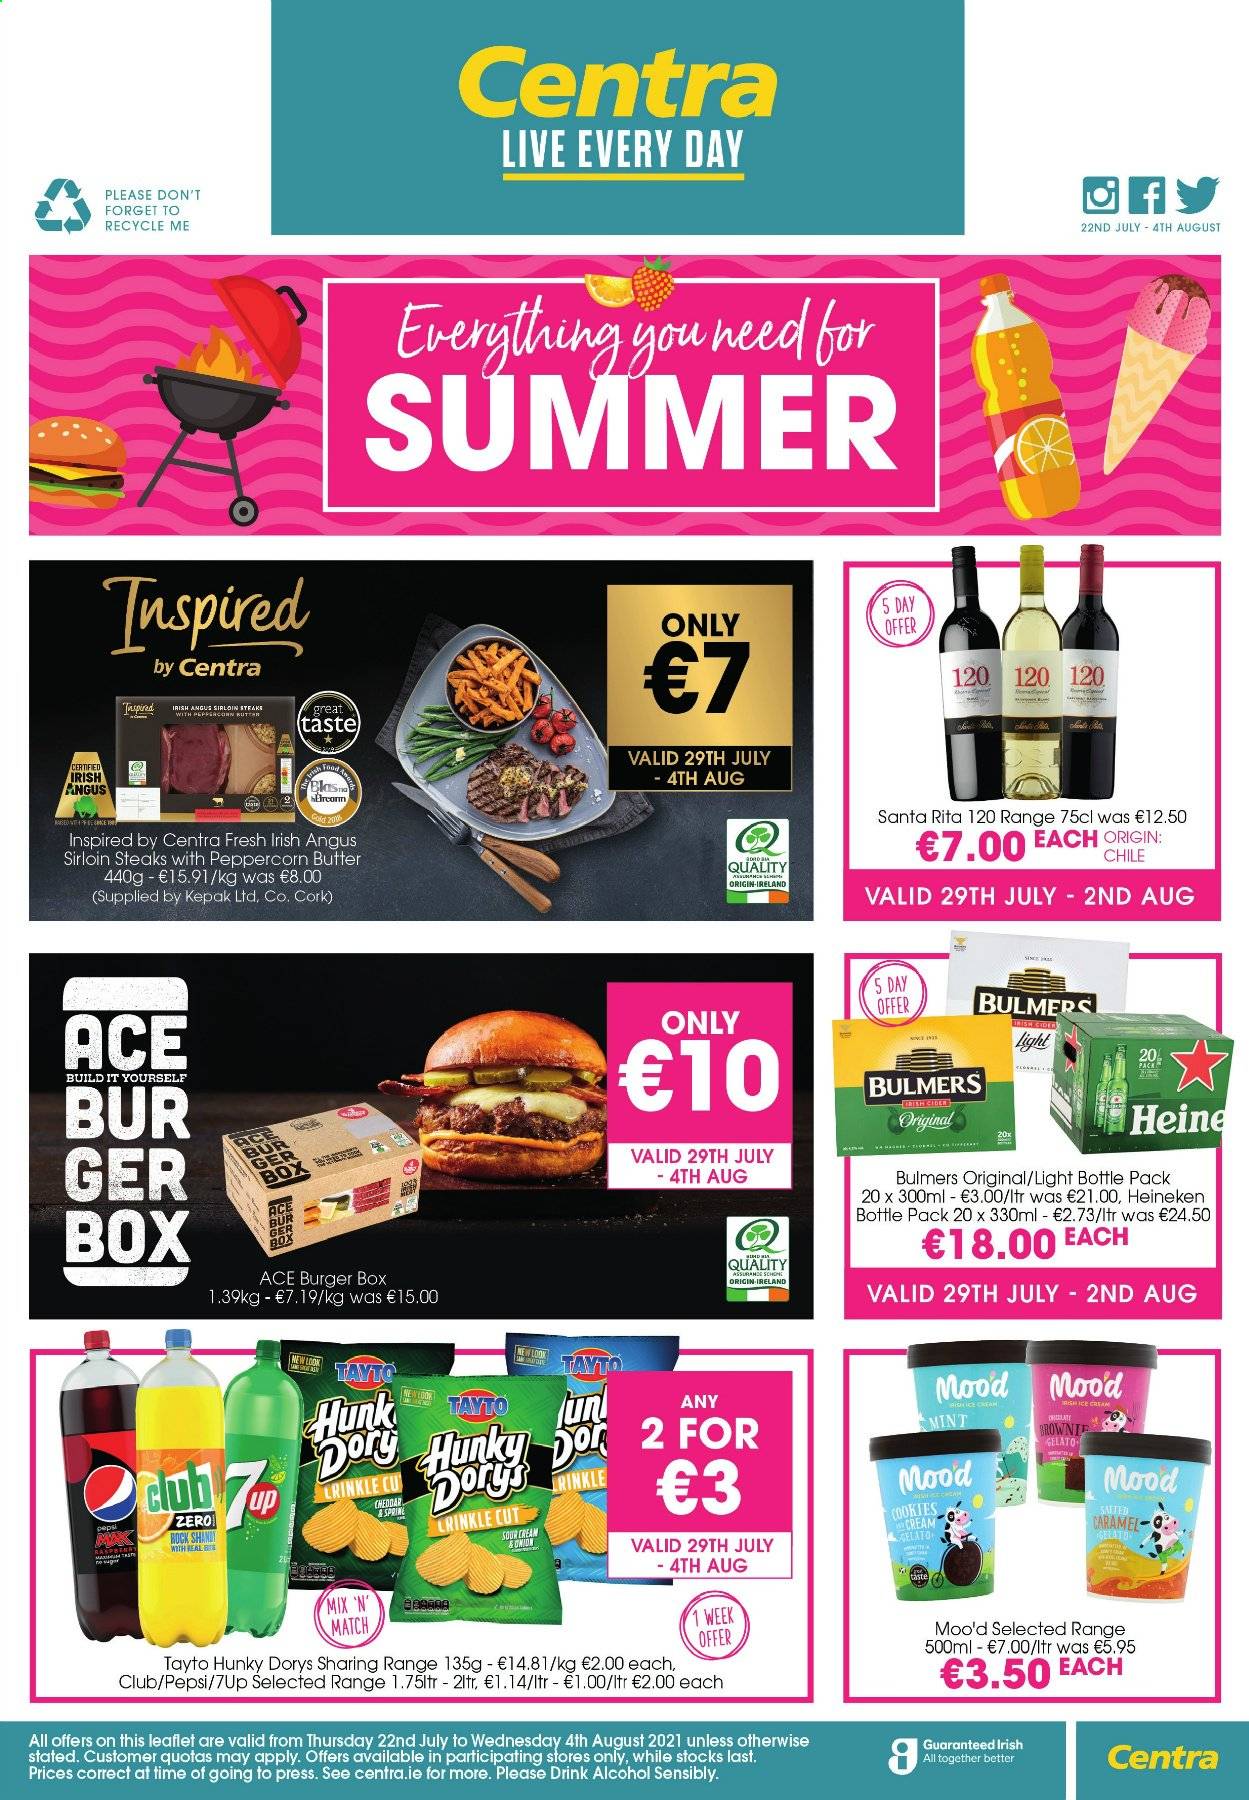 thumbnail - Centra offer  - 22.07.2021 - 04.08.2021 - Sales products - hamburger, cheddar, butter, gelato, cookies, Tayto, Ace, caramel, Pepsi, 7UP, alcohol, cider, beer, Heineken, Bulmers, steak, sirloin steak, meal box. Page 4.